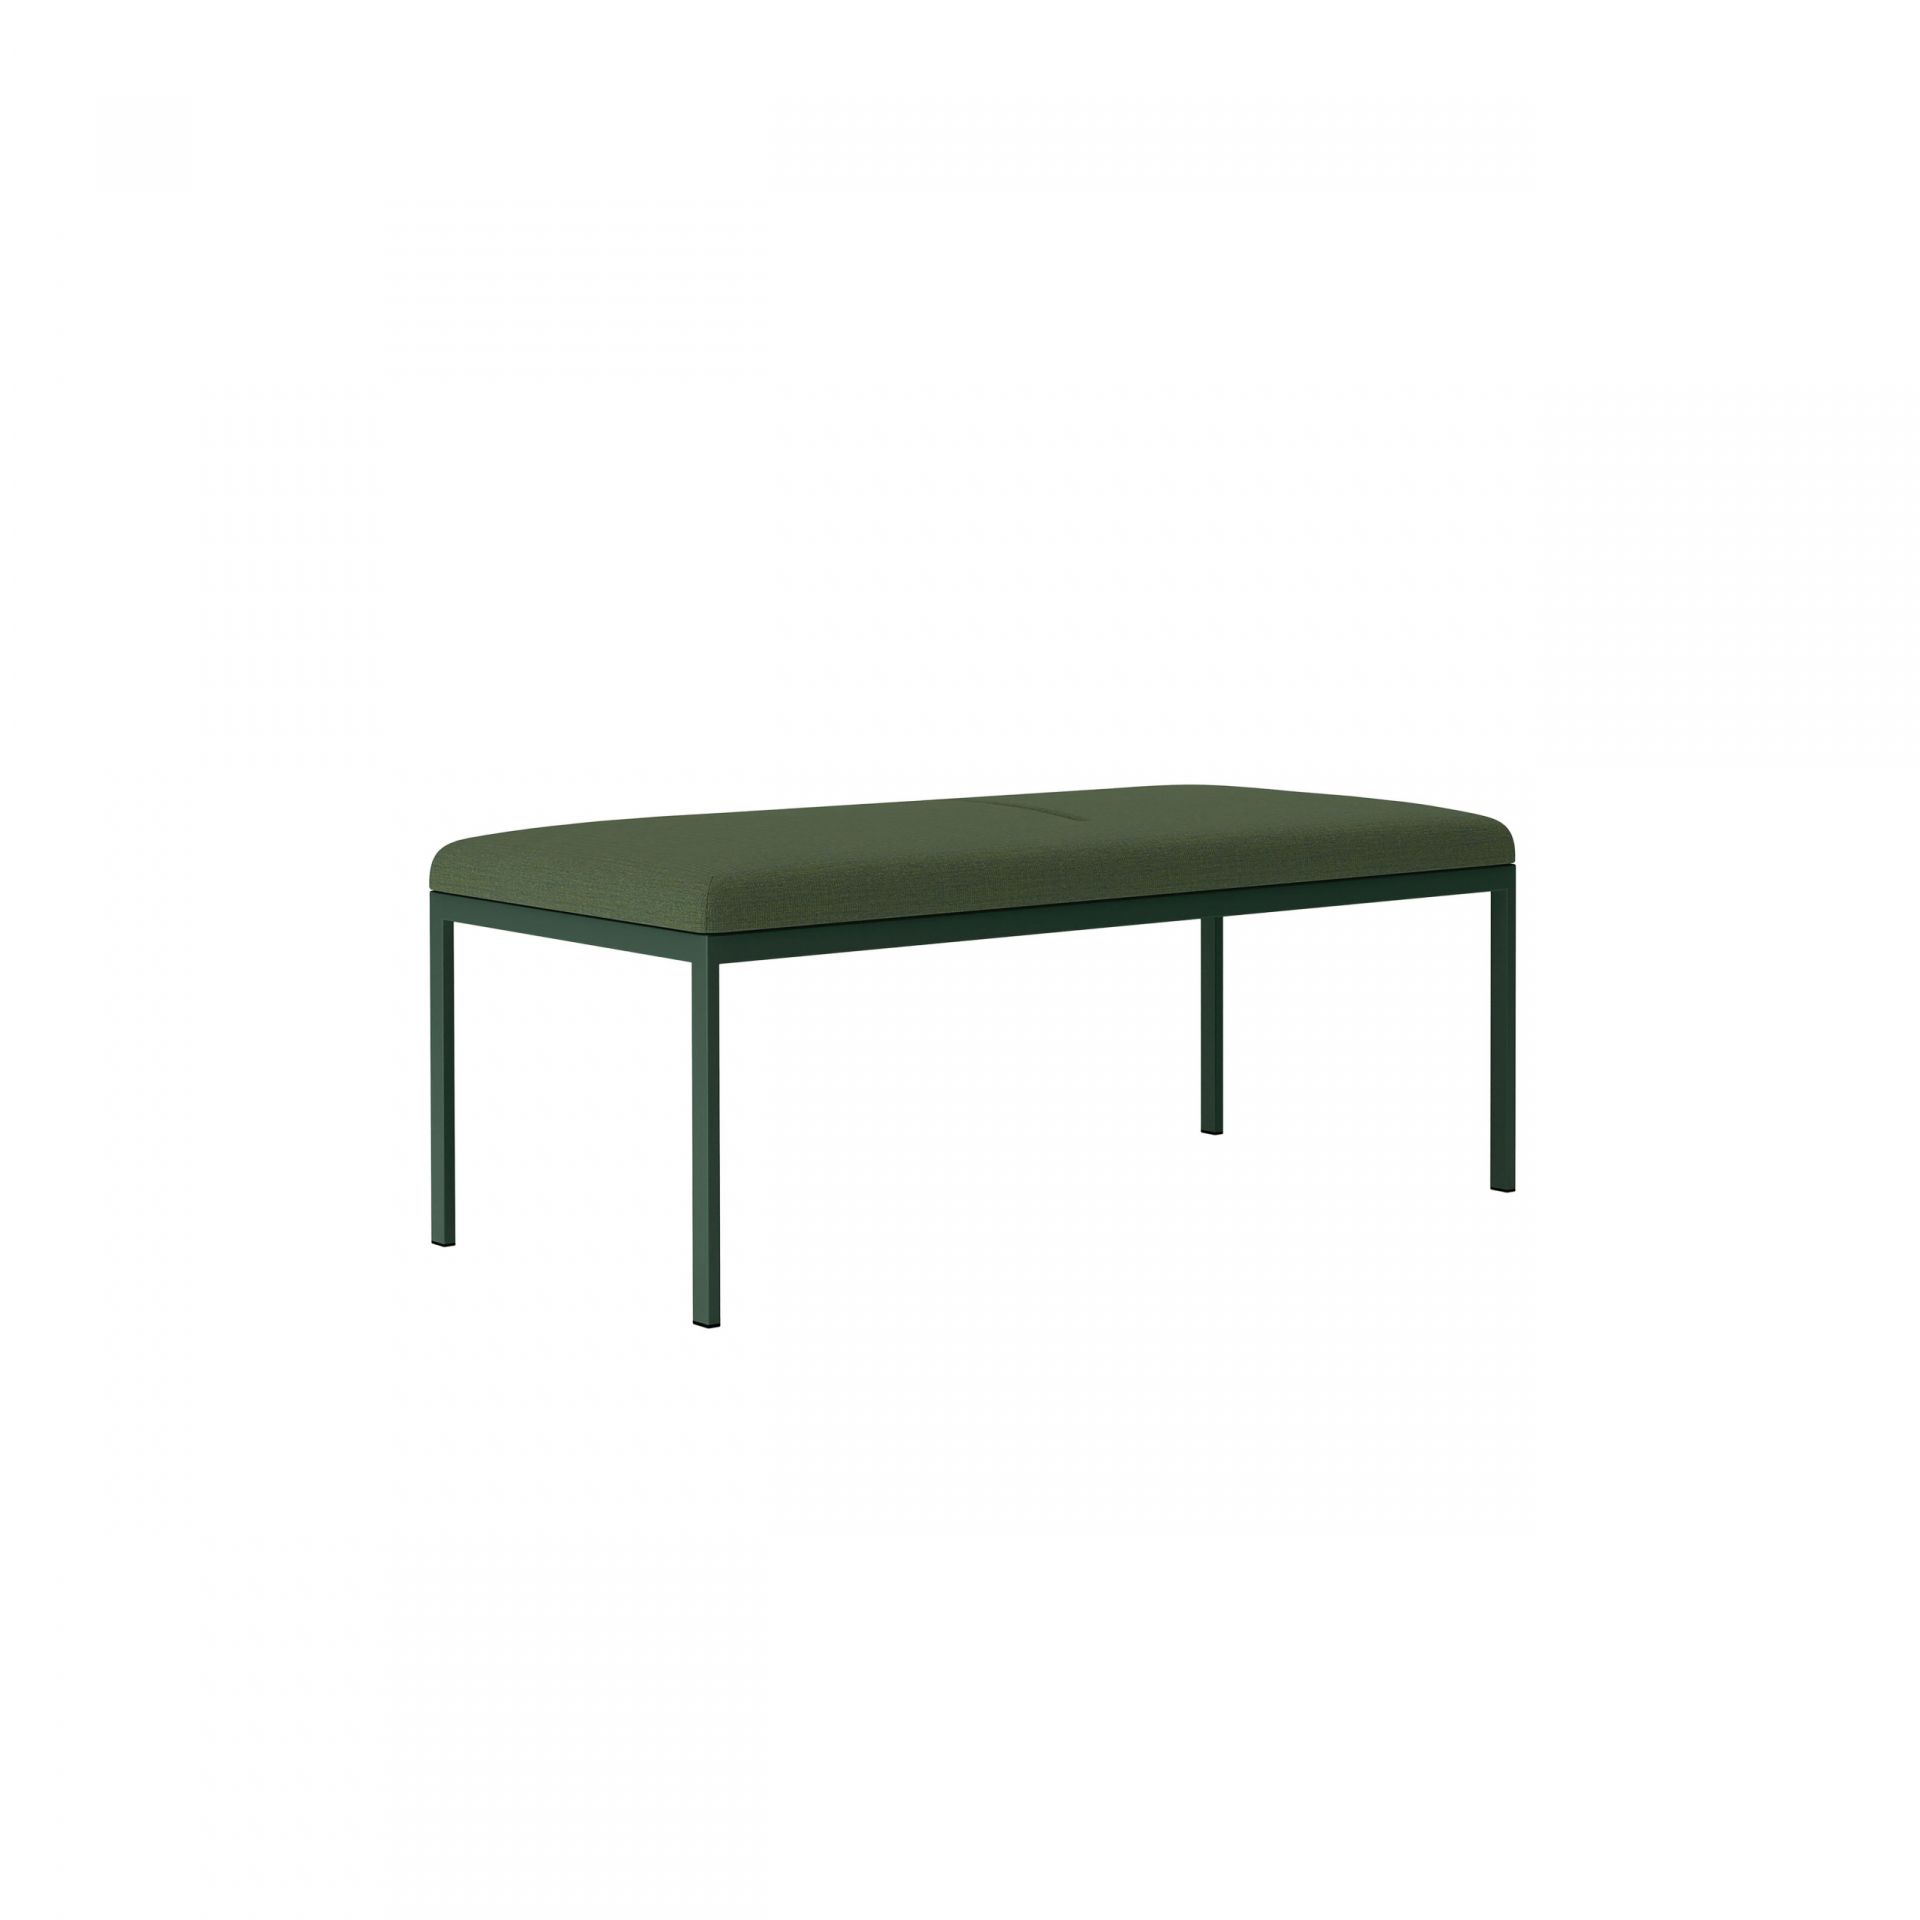 Create Seating Bench product image 1